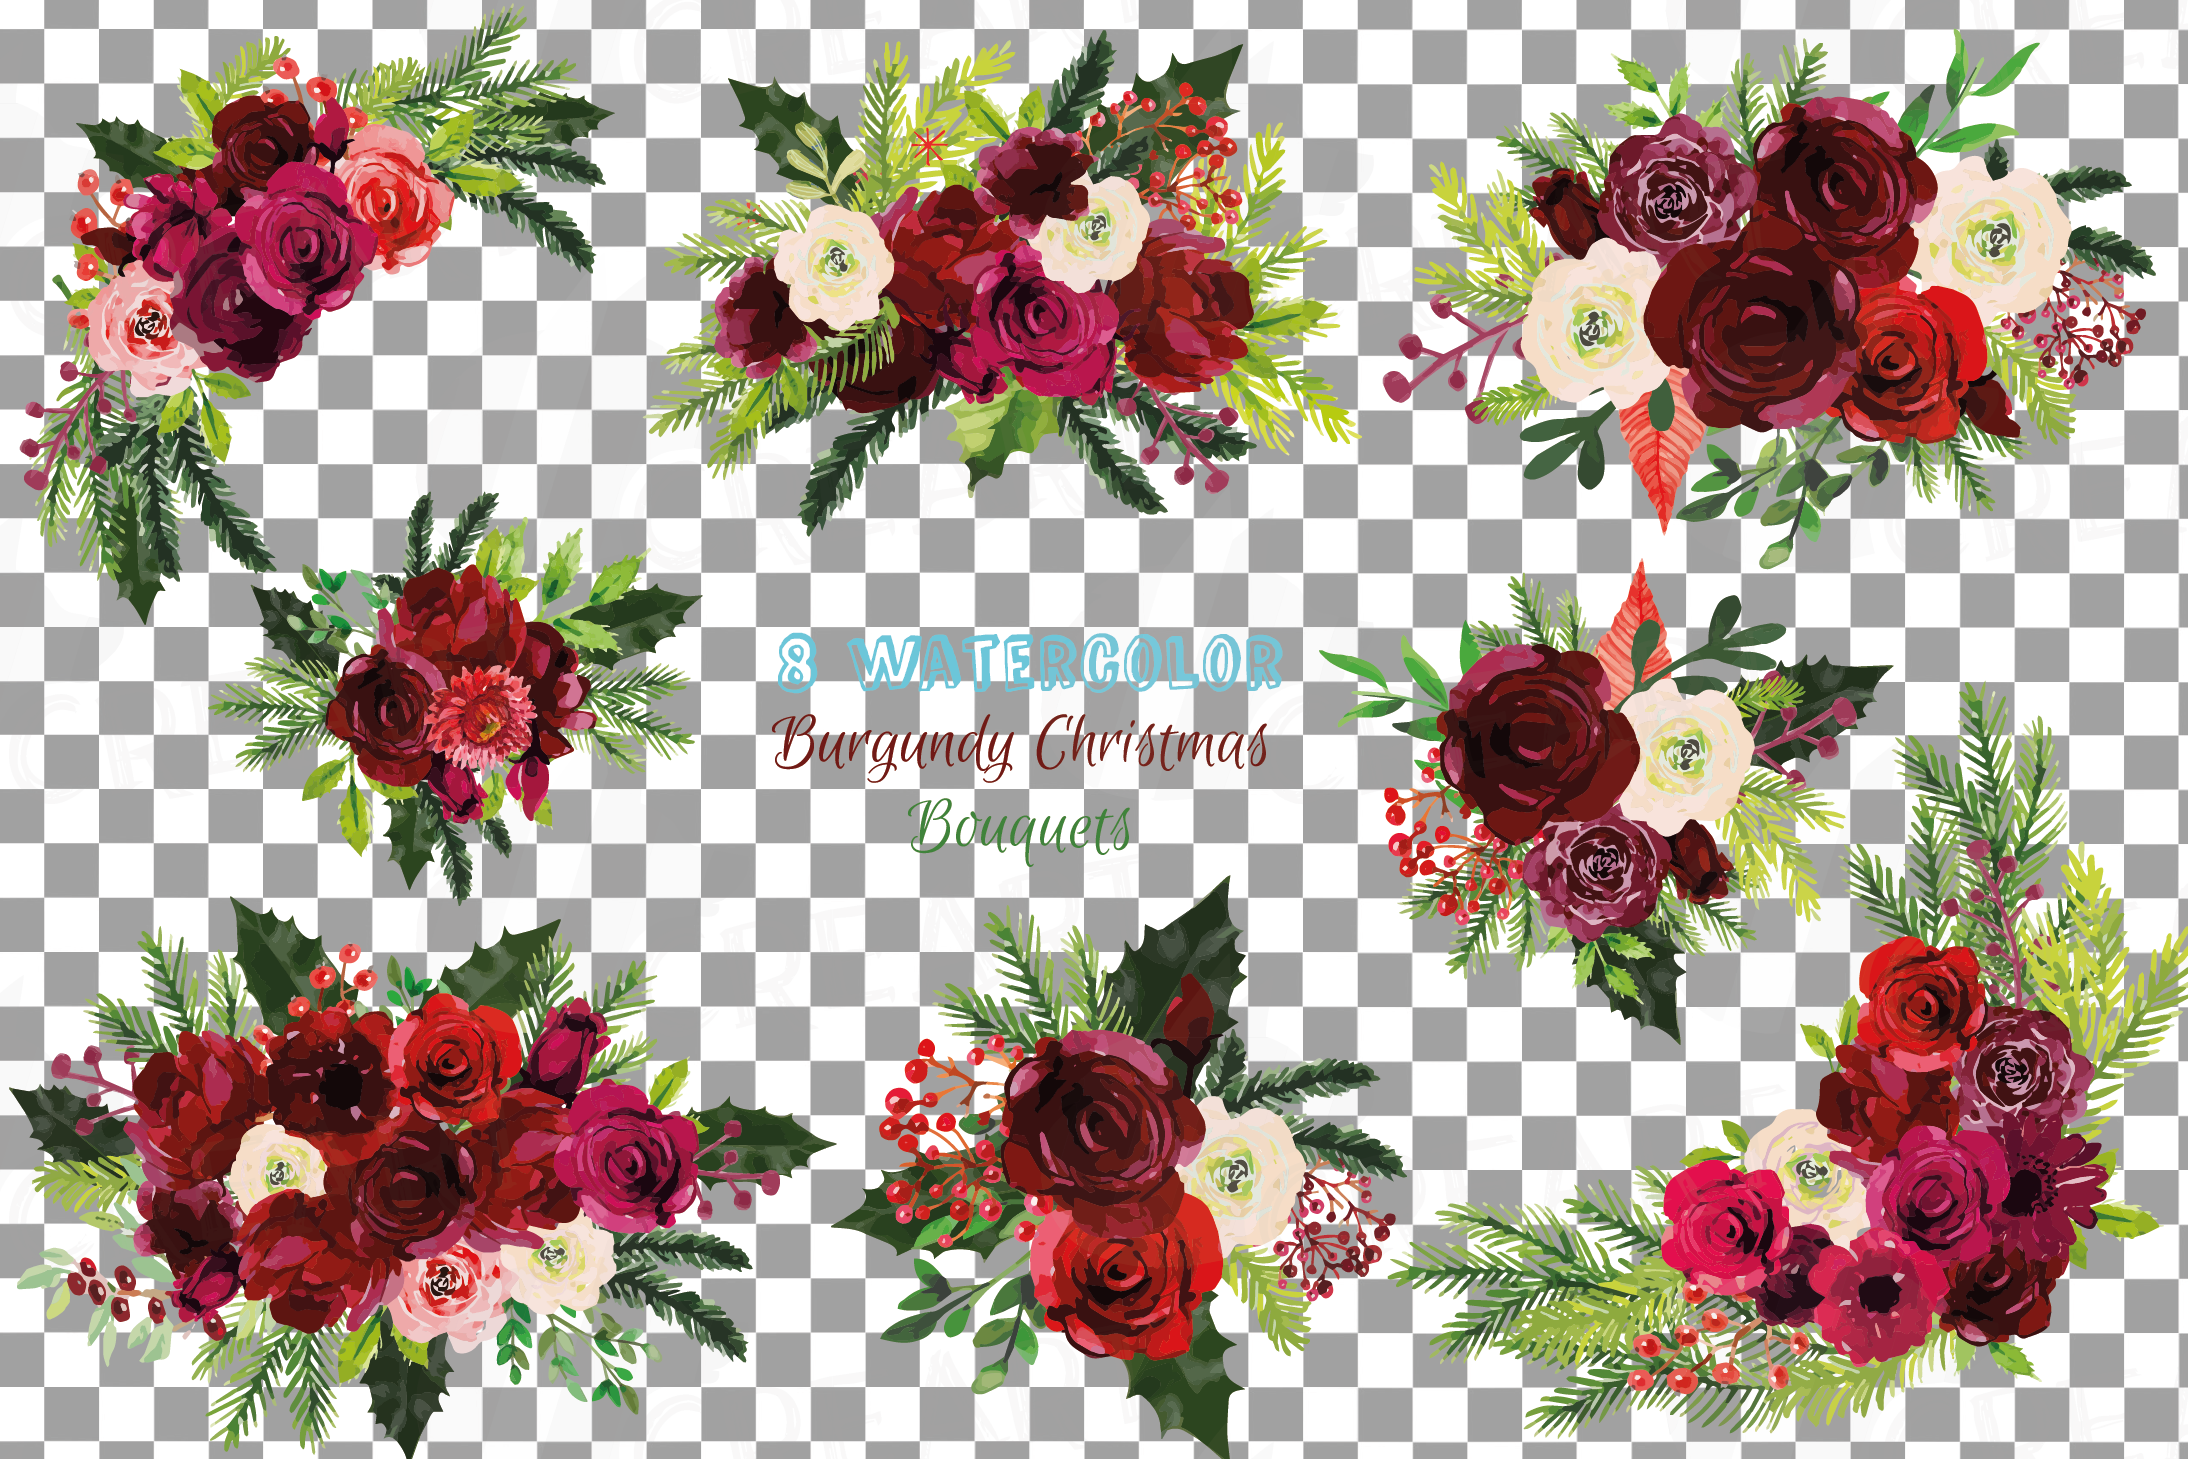 Watercolor burgundy red Christmas bouquets, holiday floral example image 2.